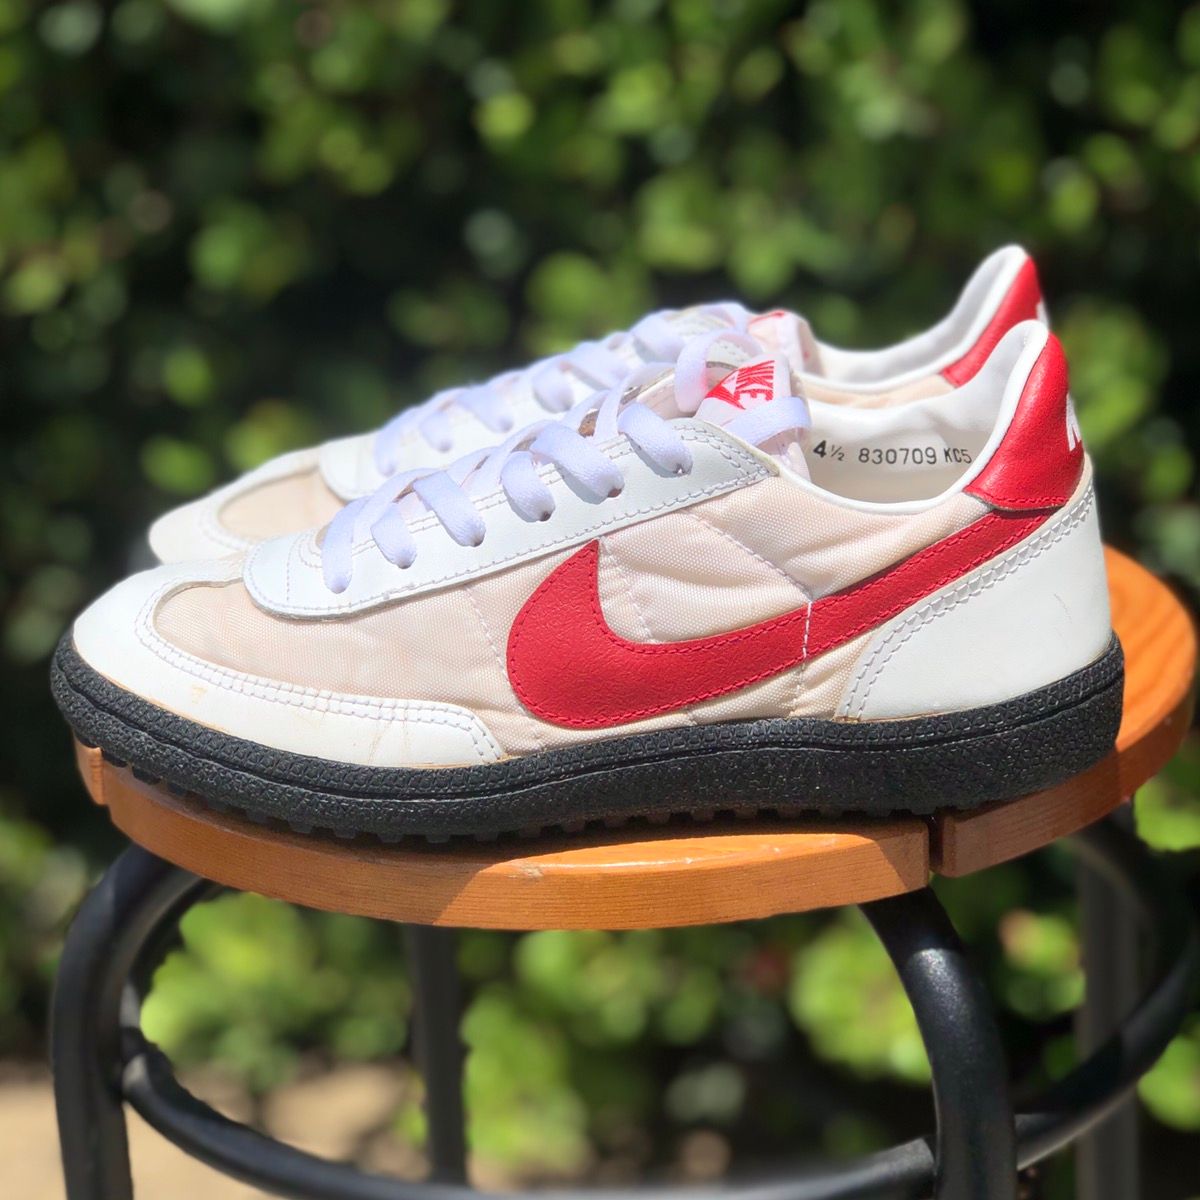 Nike Vintage 1983 Nike 80’s White PS Waffle Trainers Turf Shoes Size US 5 / EU 37 - 1 Preview